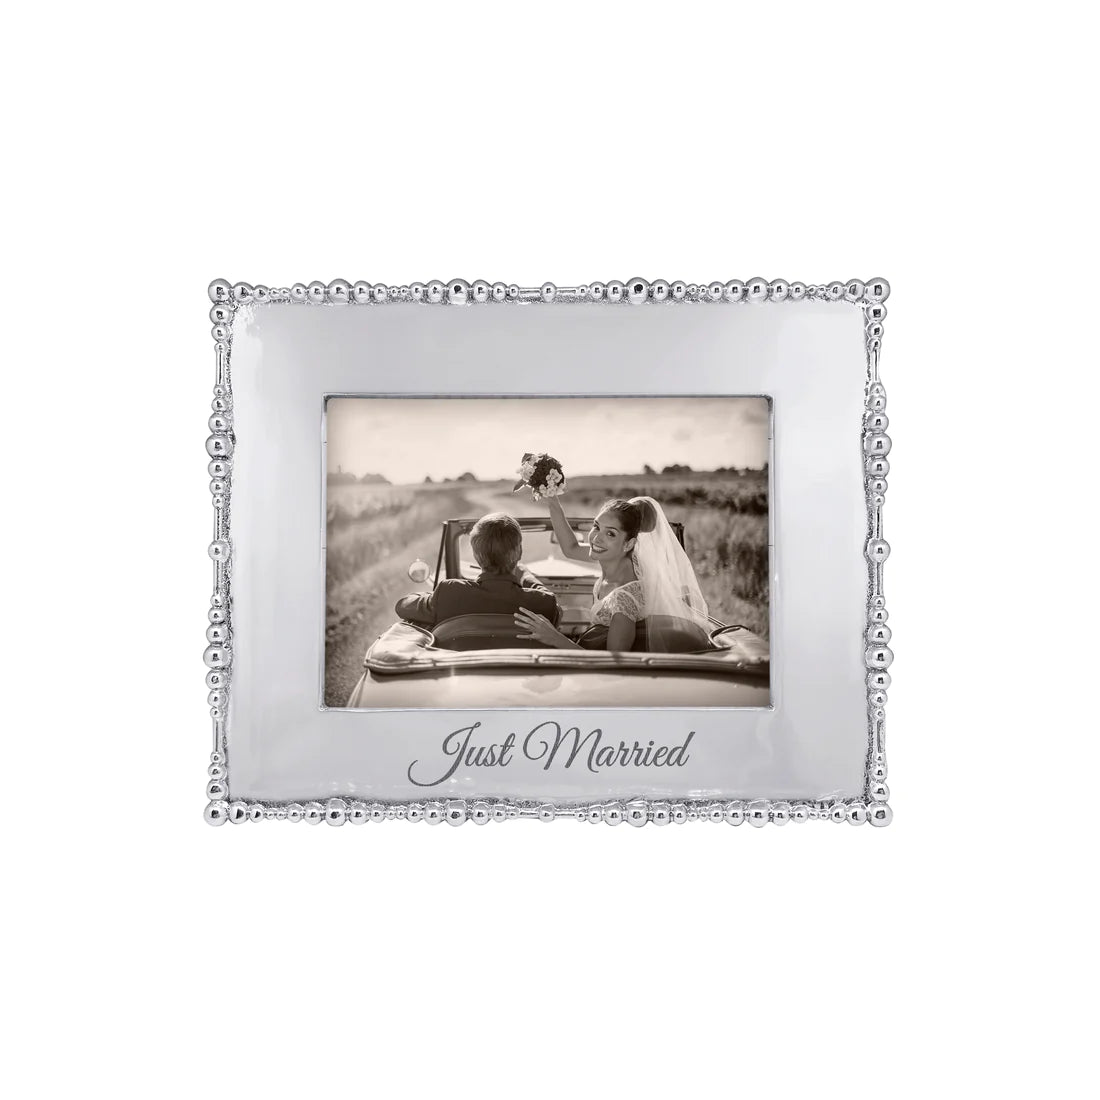 Just Married Pearl Frame - 5x7